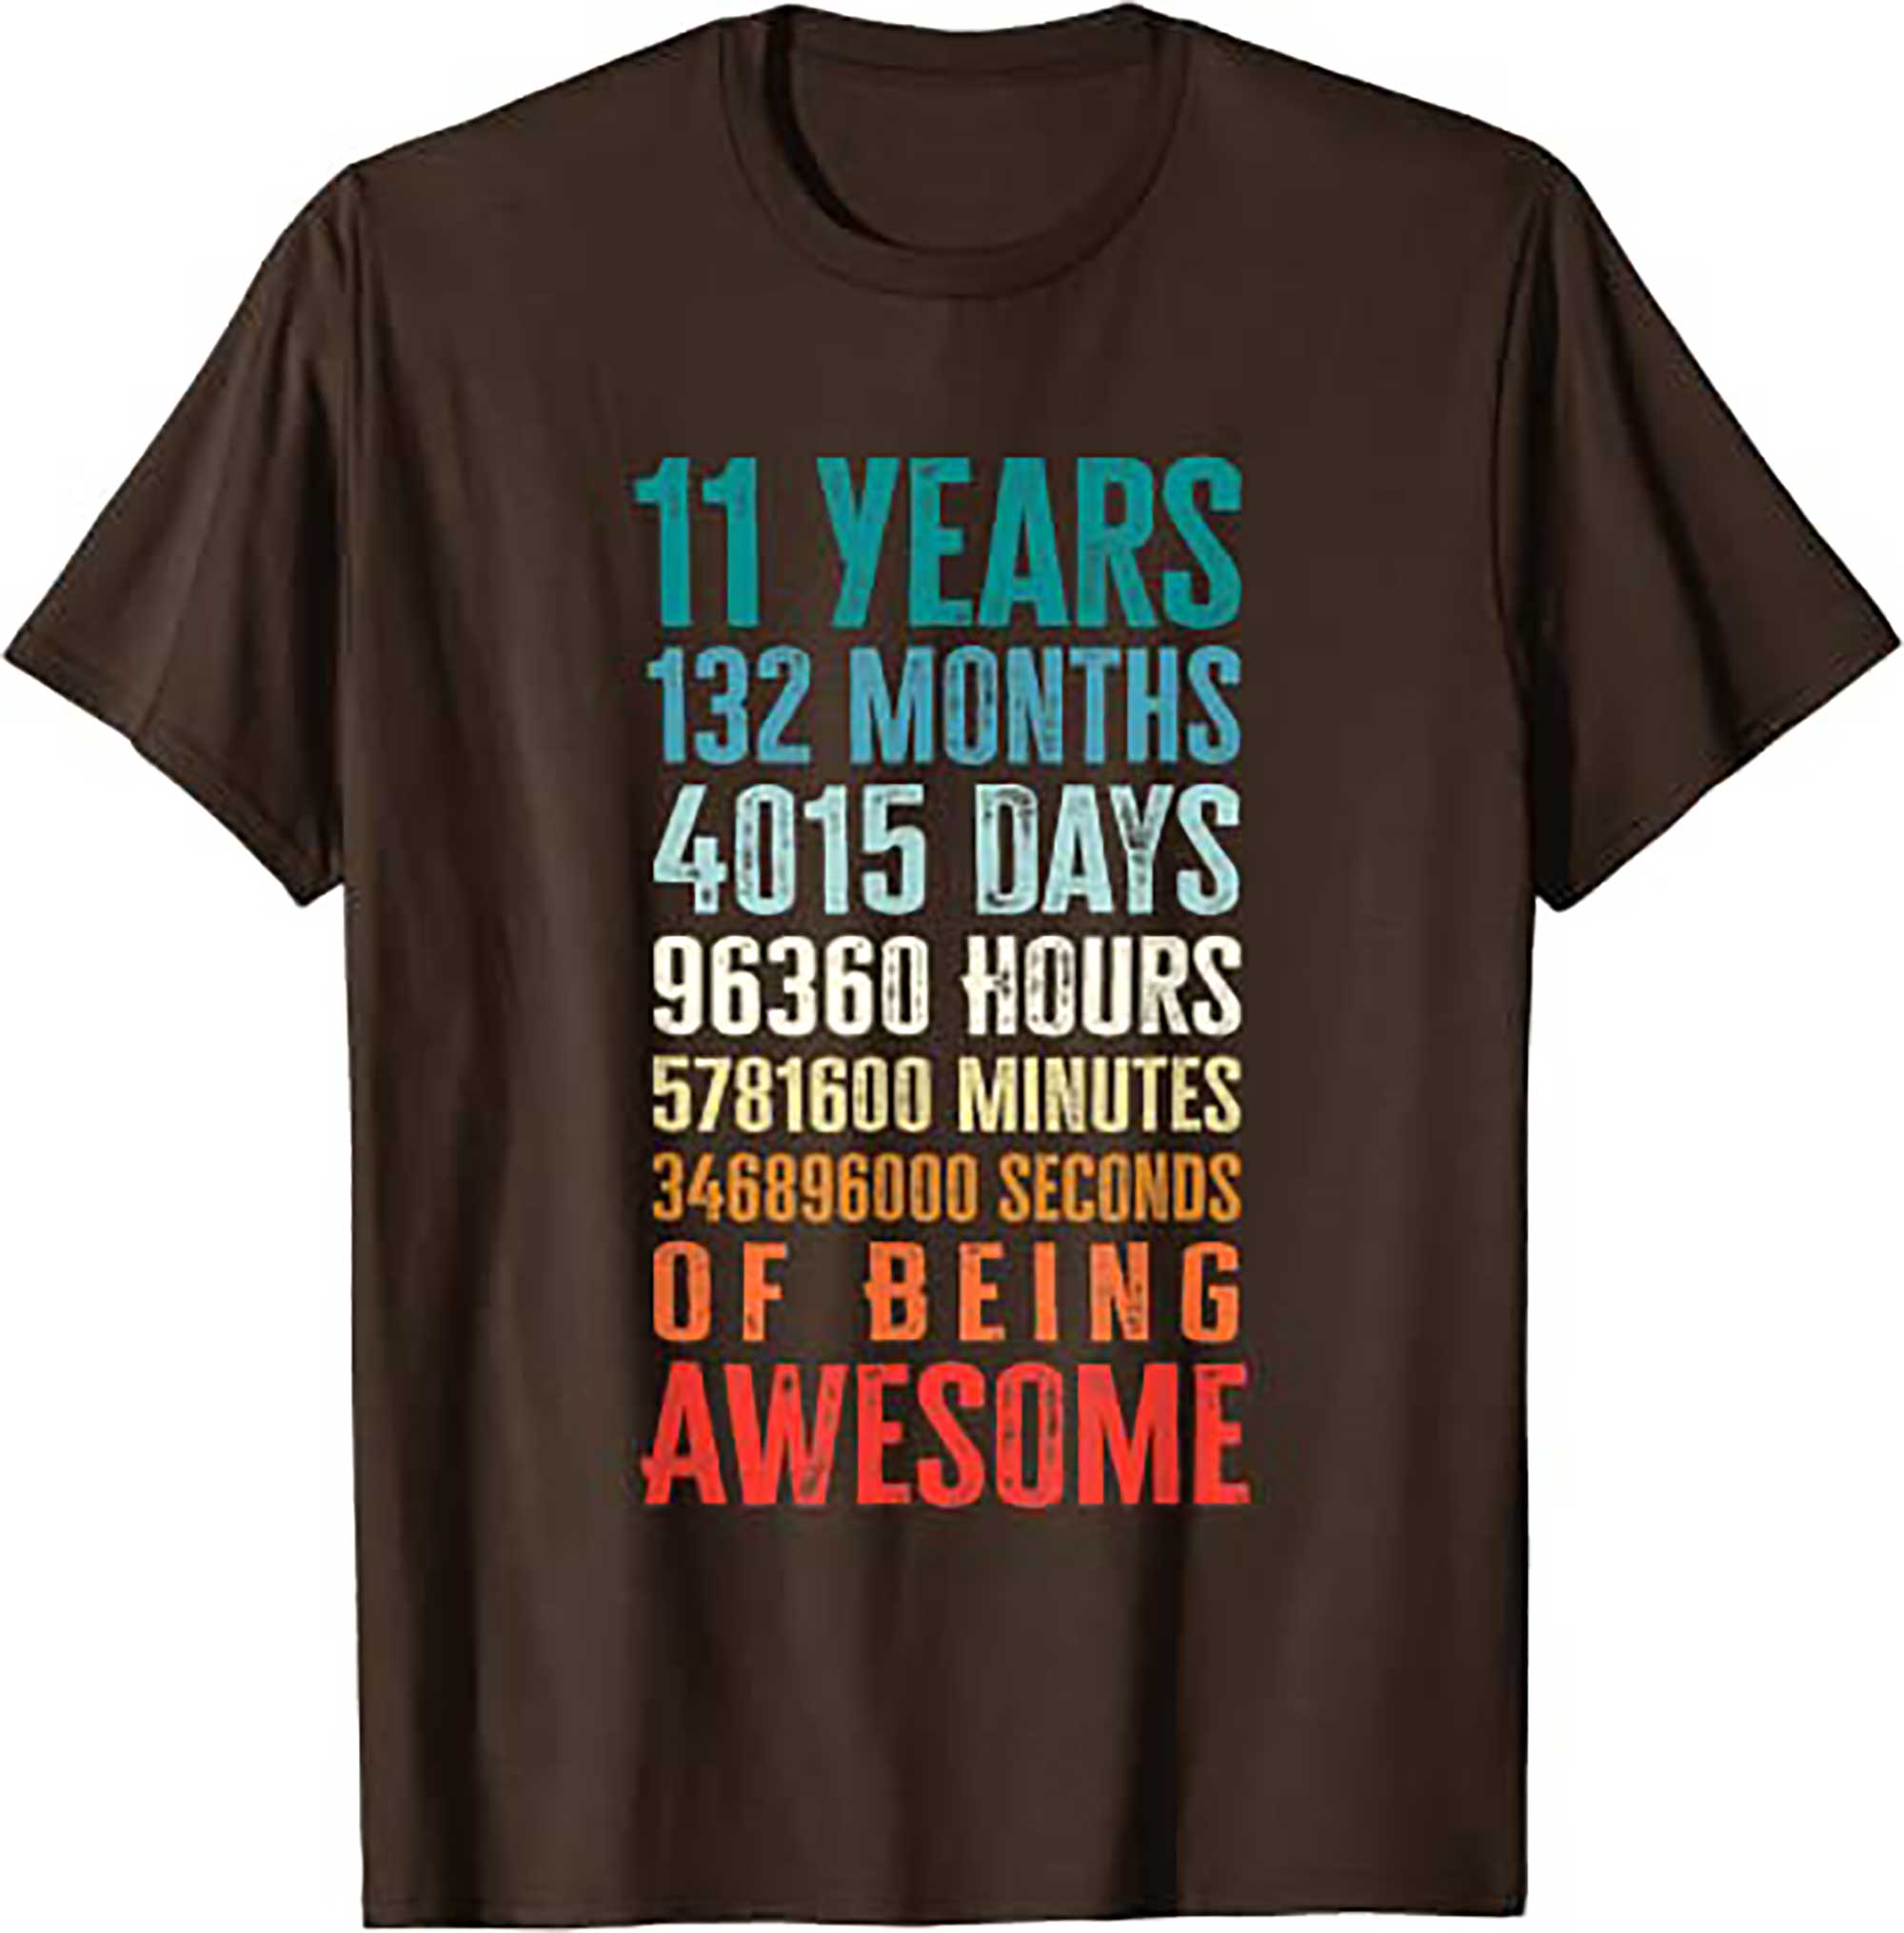 Skitongift 11 Years 132 Months Of Being Awesome 11th Birthday Gifts T Shirt 